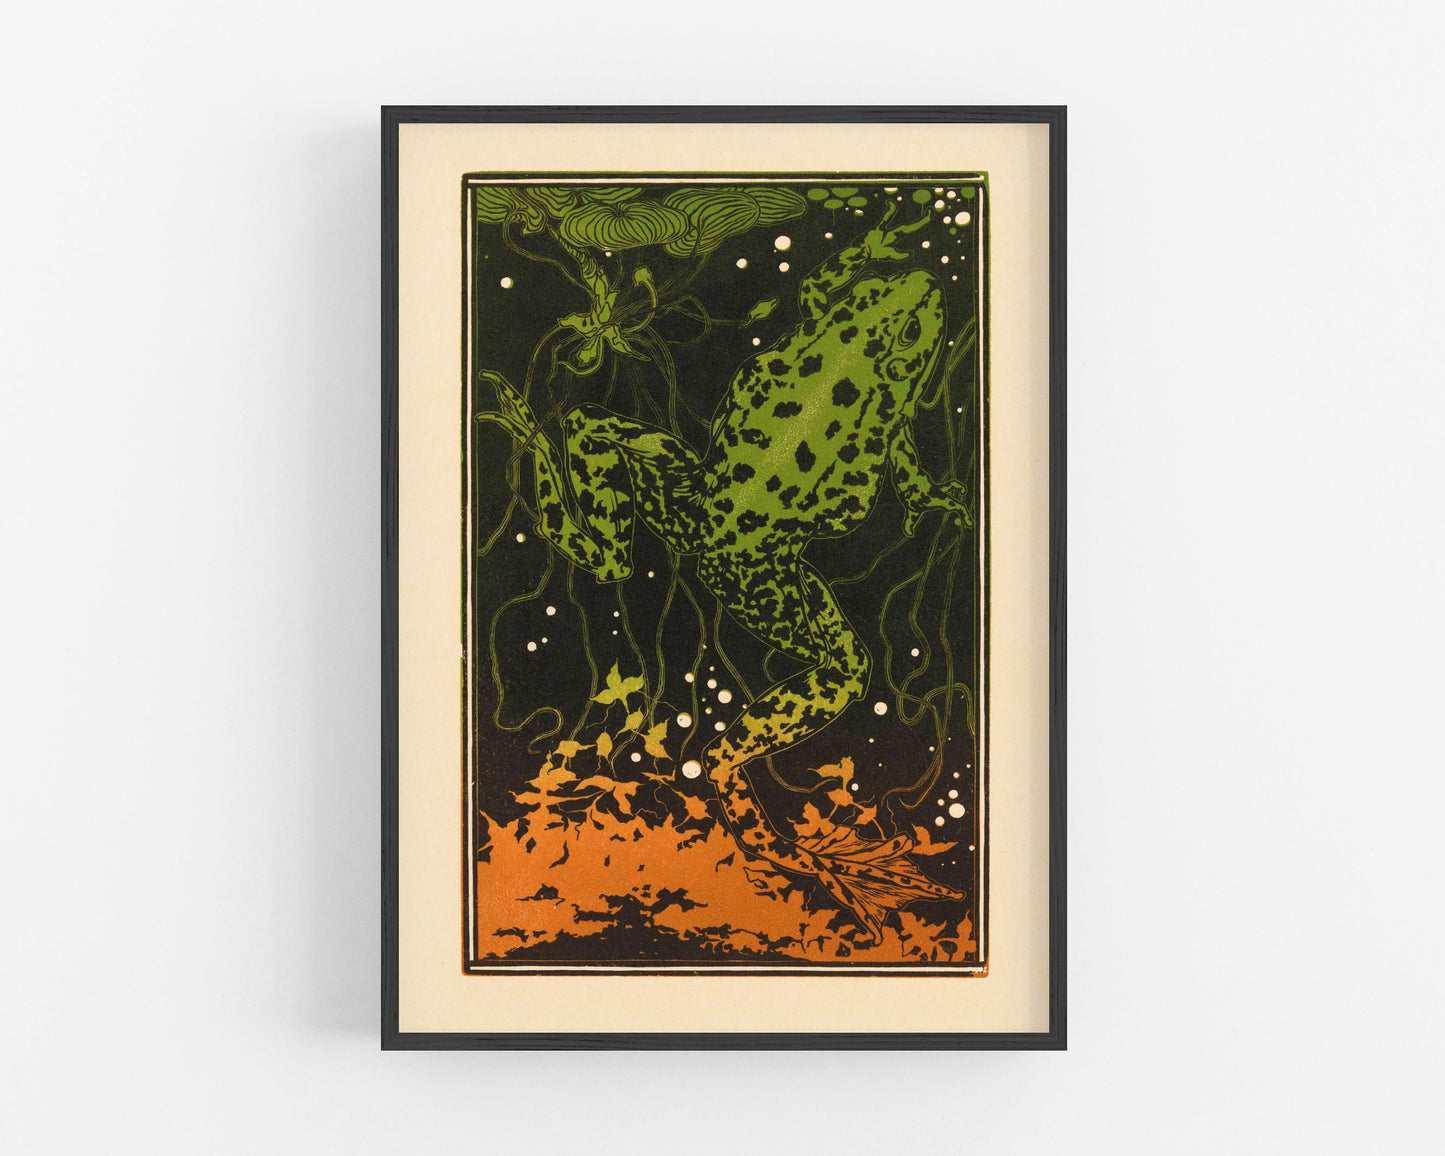 Vintage leopard frog fine art print | Swimming toad wall art | Julie de Graag color woodcut | Animal and Nature art | Eco-friendly